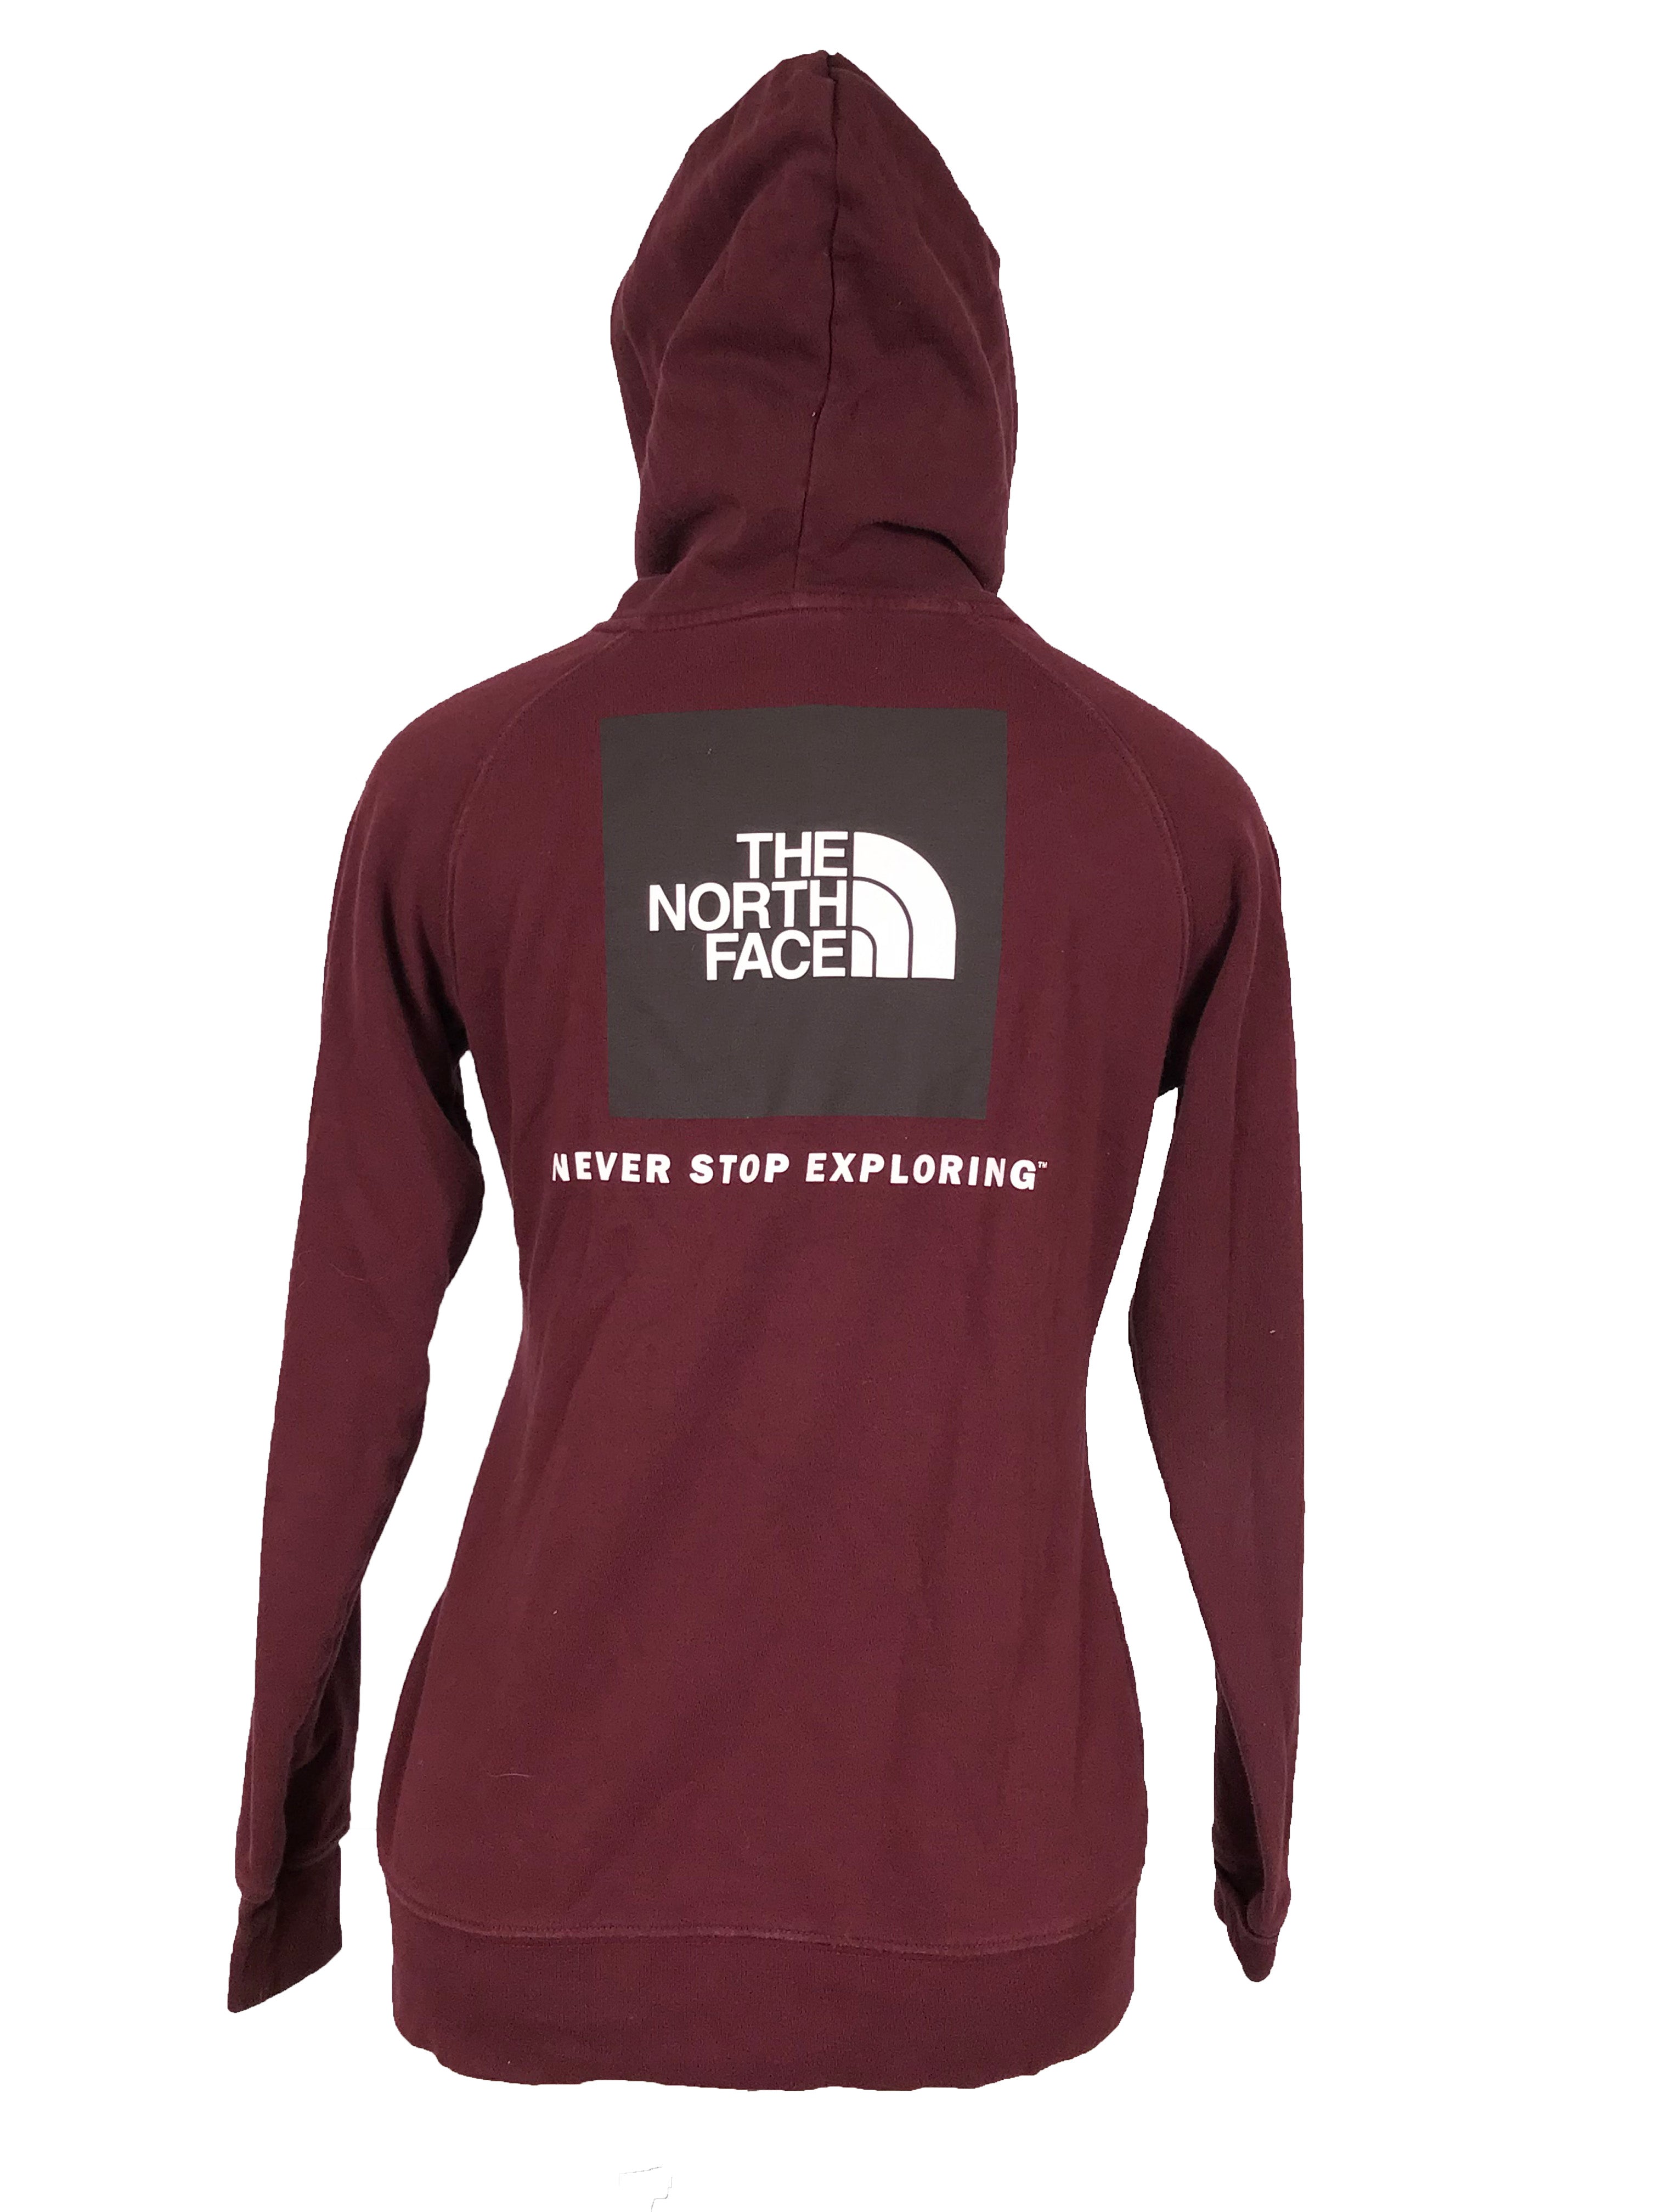 The North Face Burgundy Hoodie Women's Size S